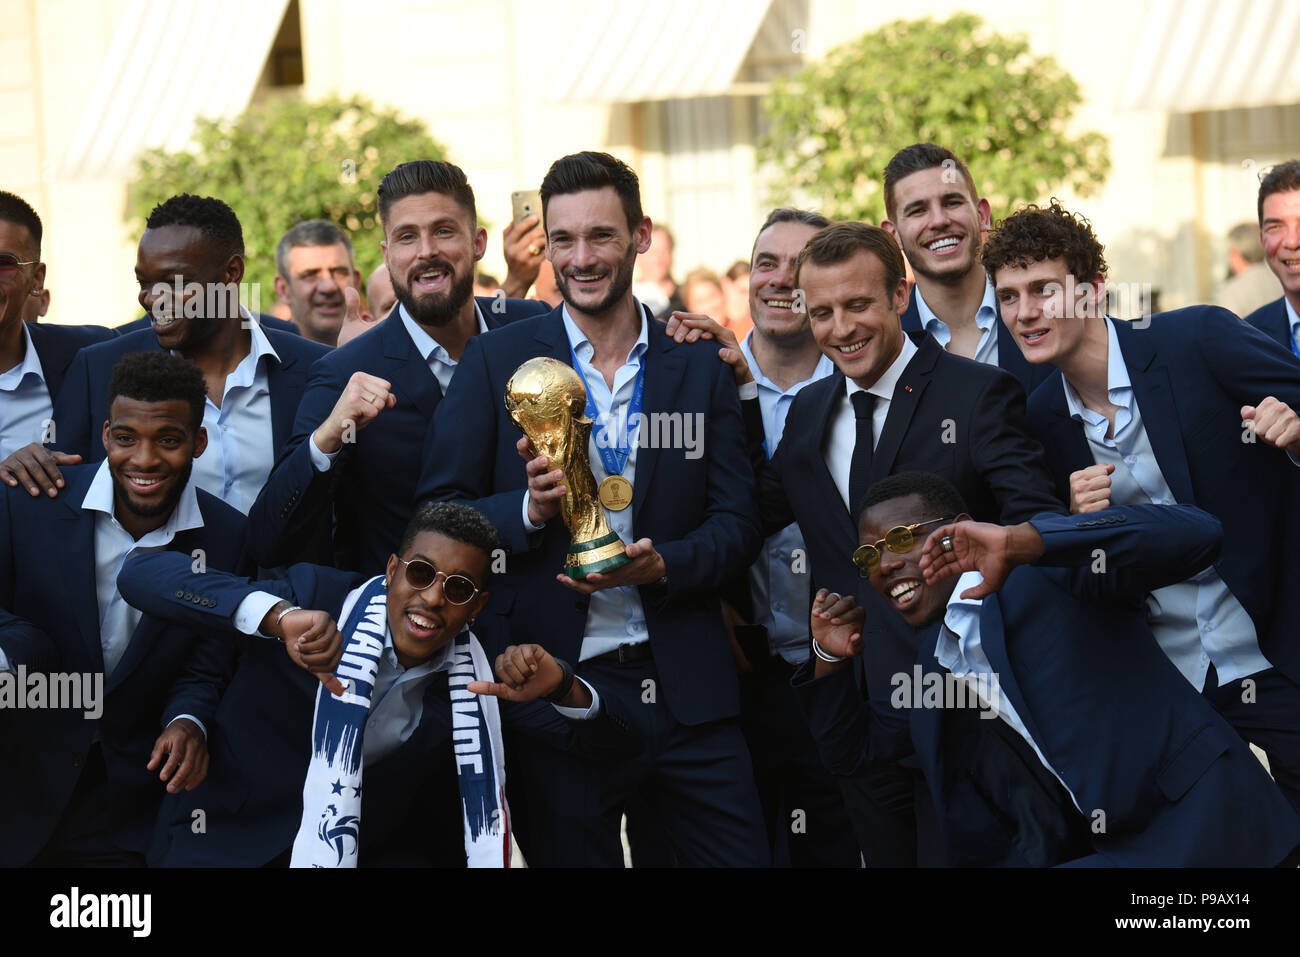 Paris, France. 16th July 2018. French President Emmanuel Macron welcomes the French football team at the presidential Elysee palace in the wake of France's World Cup victory. Le president francais Emmanuel Macron accueille les joueurs de l'equipe de France  au palais de l'Elysee apres leur victoire en Coupe du Monde. *** FRANCE OUT / NO SALES TO FRENCH MEDIA *** Credit: Idealink Photography/Alamy Live News Stock Photo